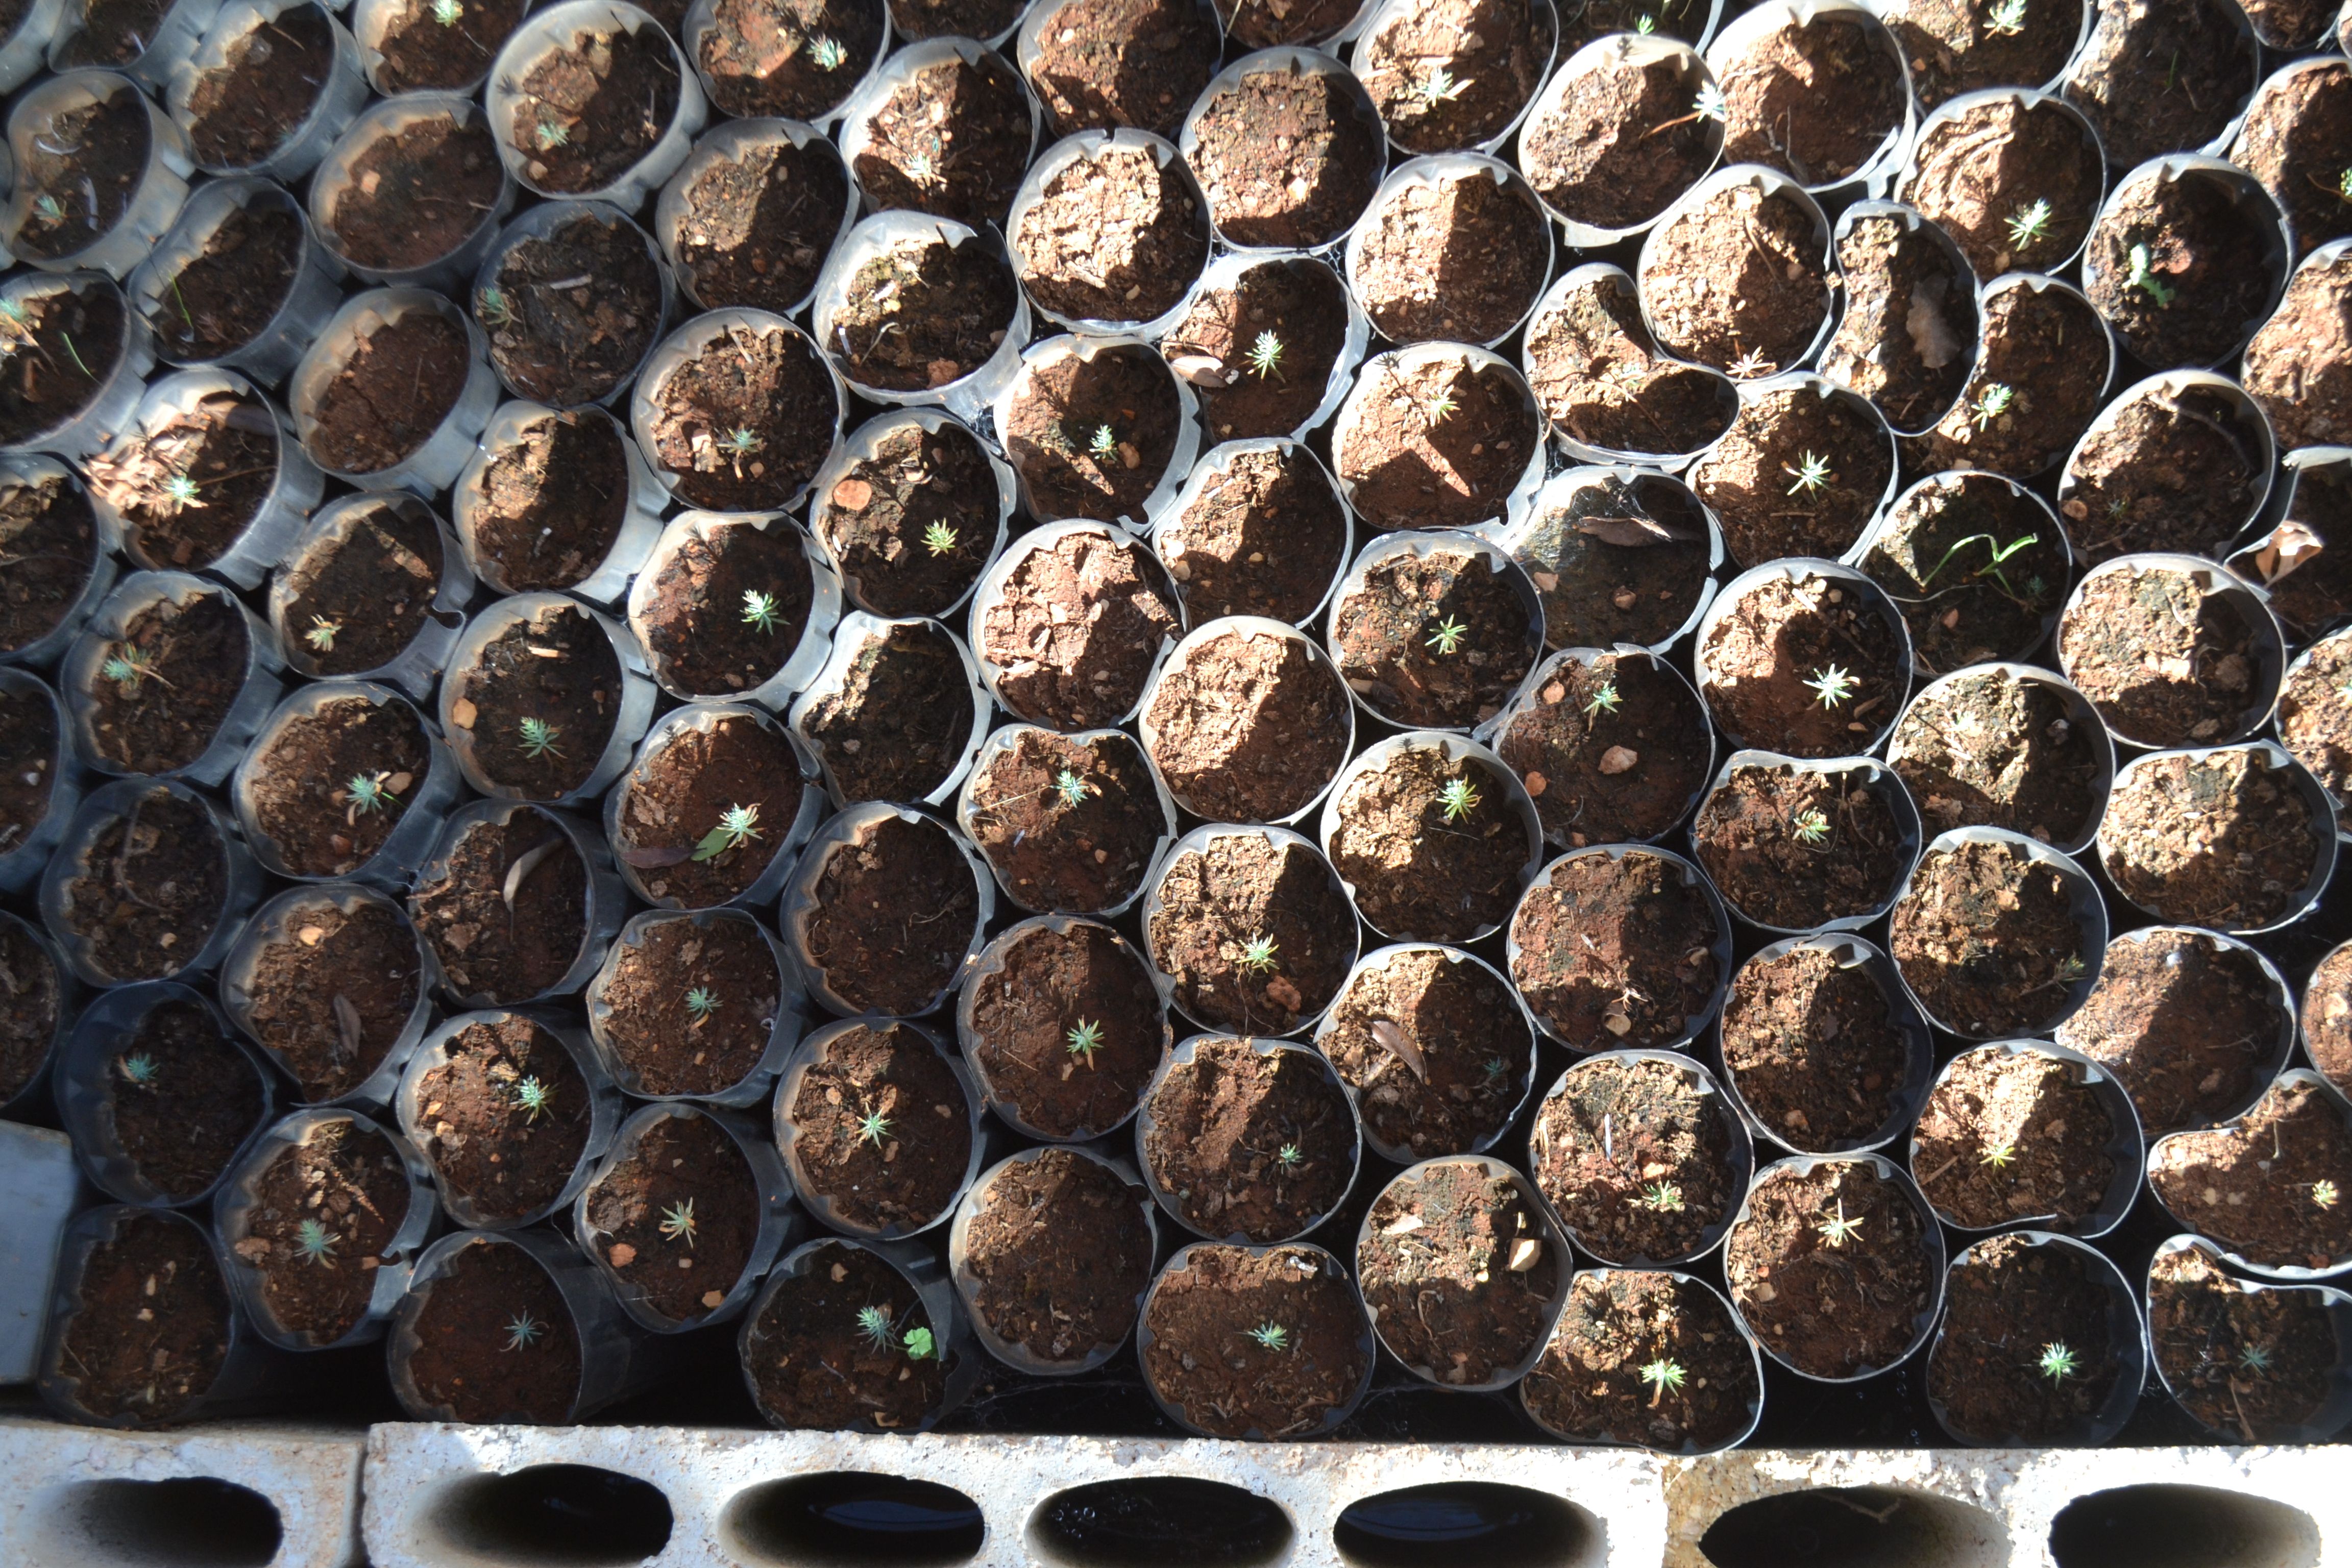 Two to three-month-old seedlings in the nursery, where they grow for four years before being planted. Image by Catherine Cartier. Lebanon, 2019.
